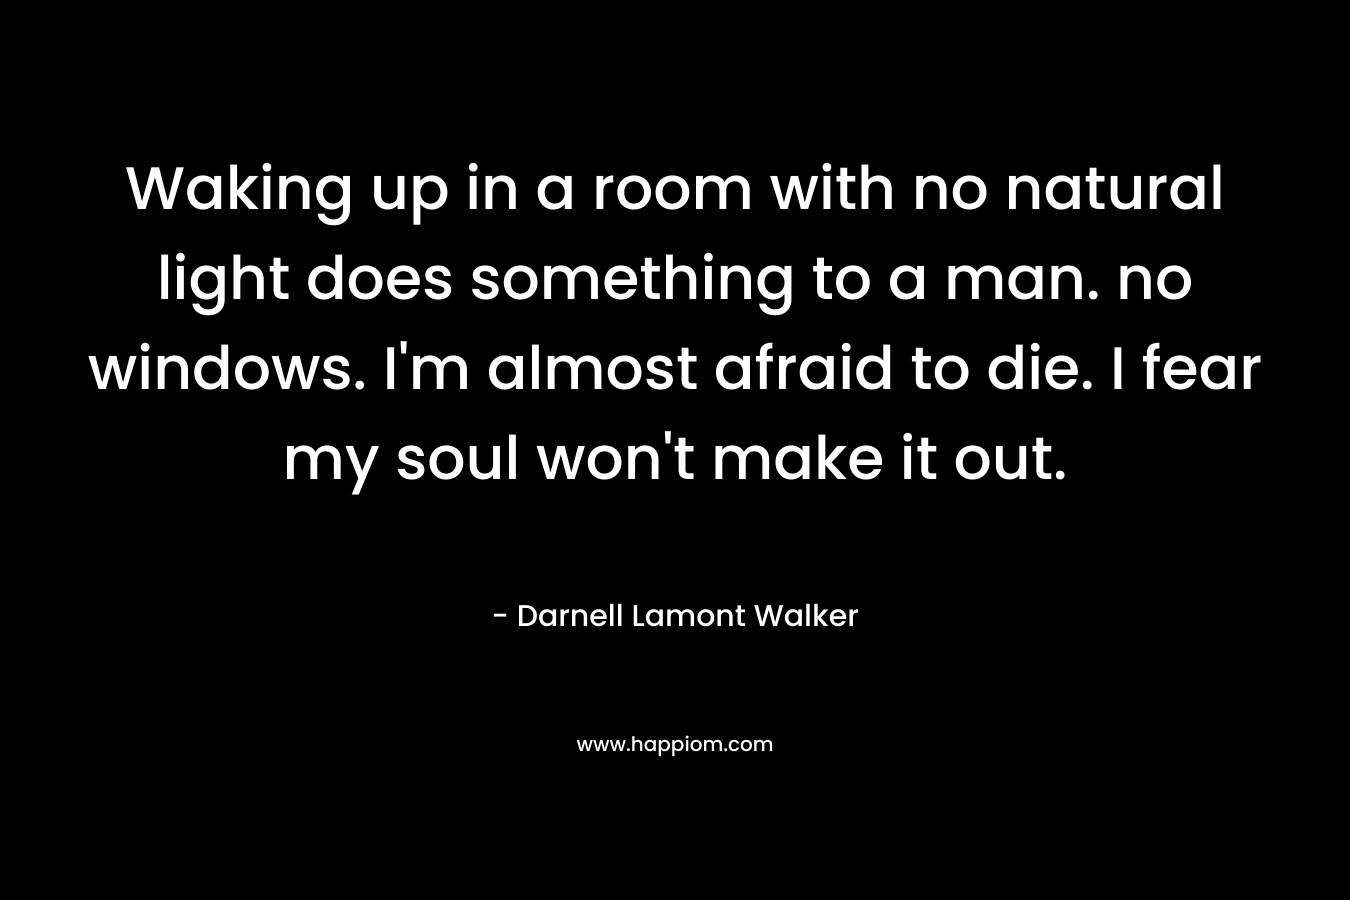 Waking up in a room with no natural light does something to a man. no windows. I’m almost afraid to die. I fear my soul won’t make it out. – Darnell Lamont Walker